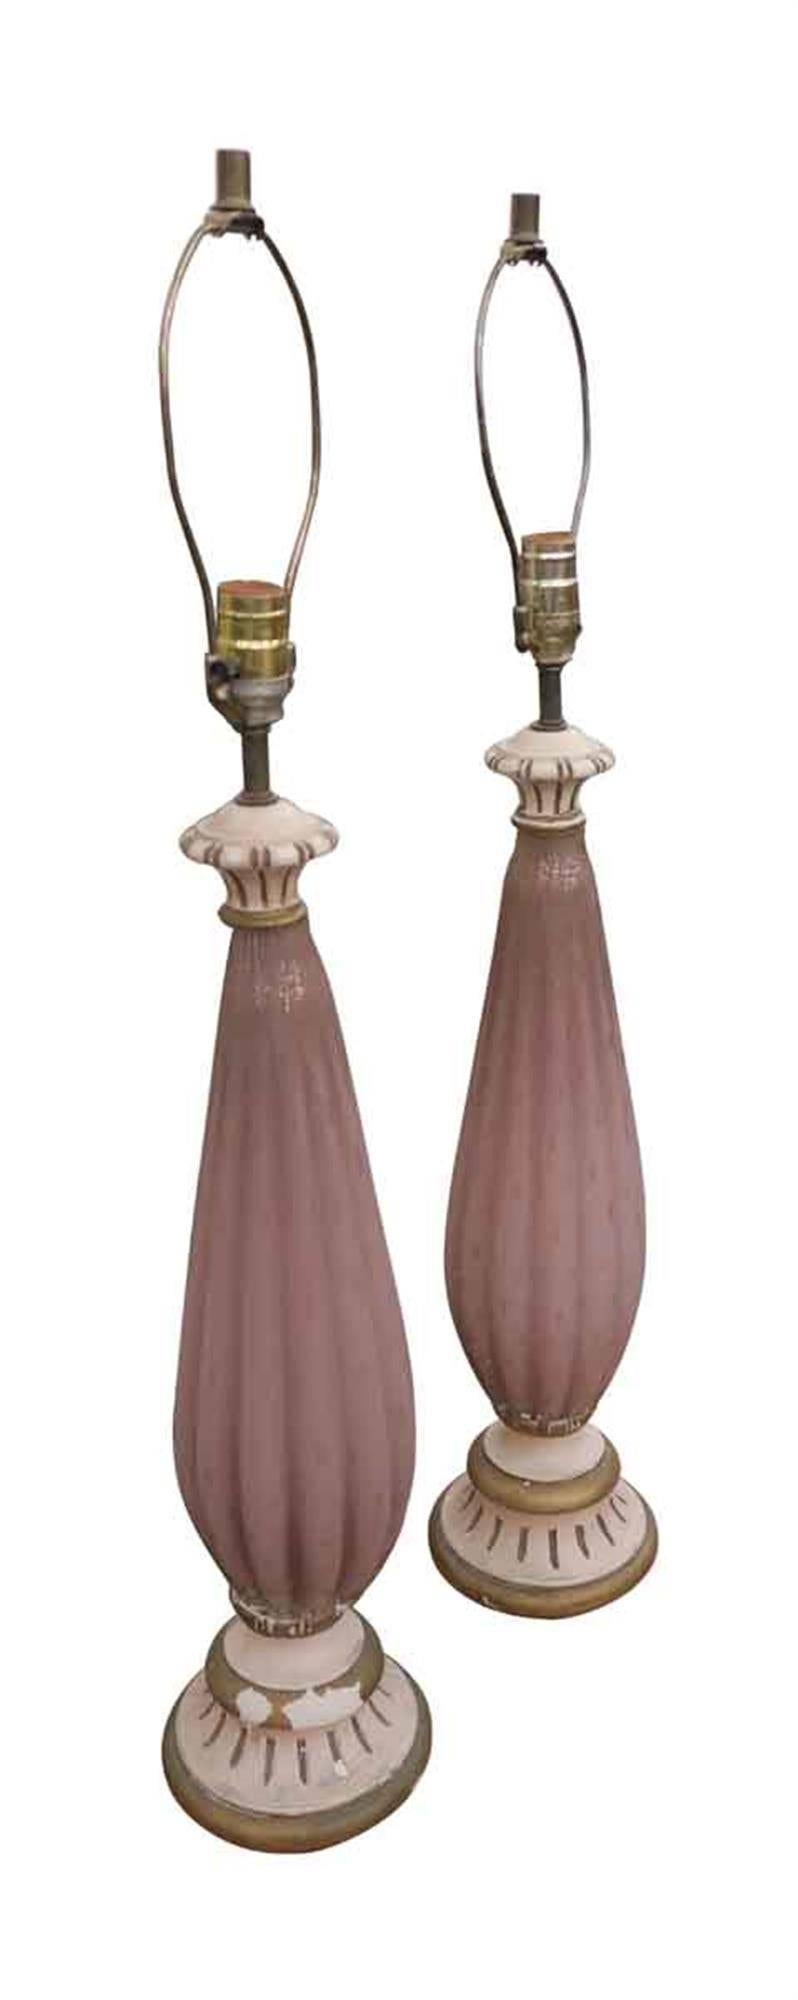 1960s handblown pink fluted Murano glass lamps on a carved and hand-painted wooden base. The lamps are electrified and ready to go. Priced as a pair. This can be viewed at one of our New York City locations. Please inquire for the exact address.